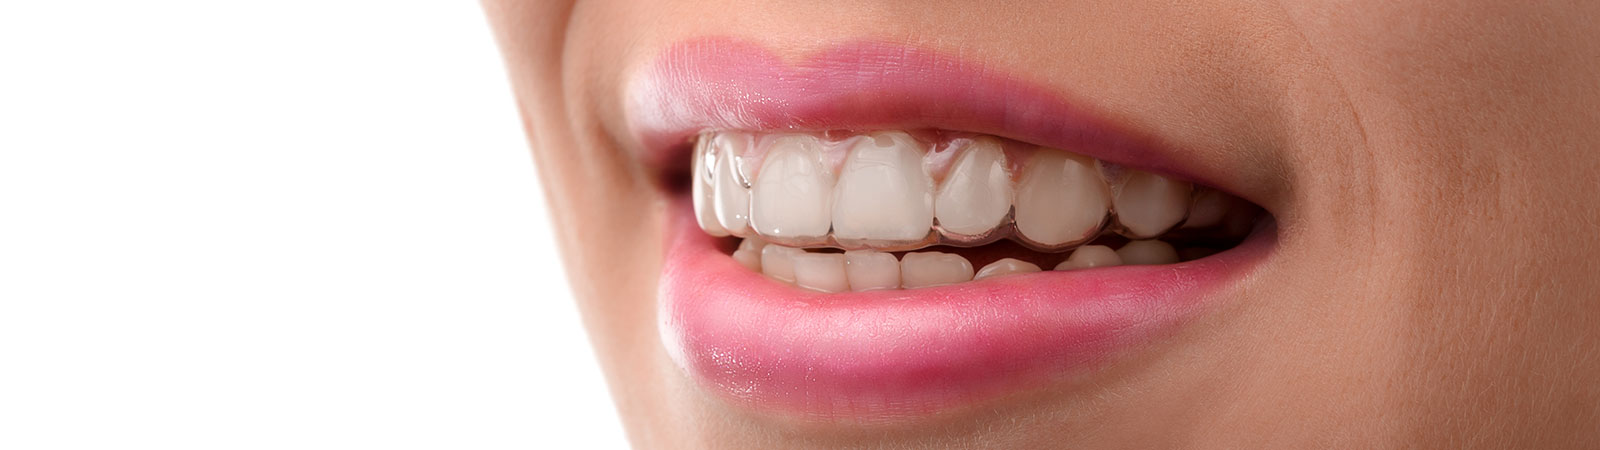 Invisible Braces, Visible Results: Why Invisalign® is the Clear Choice -  Town Center Dental Cedar Park